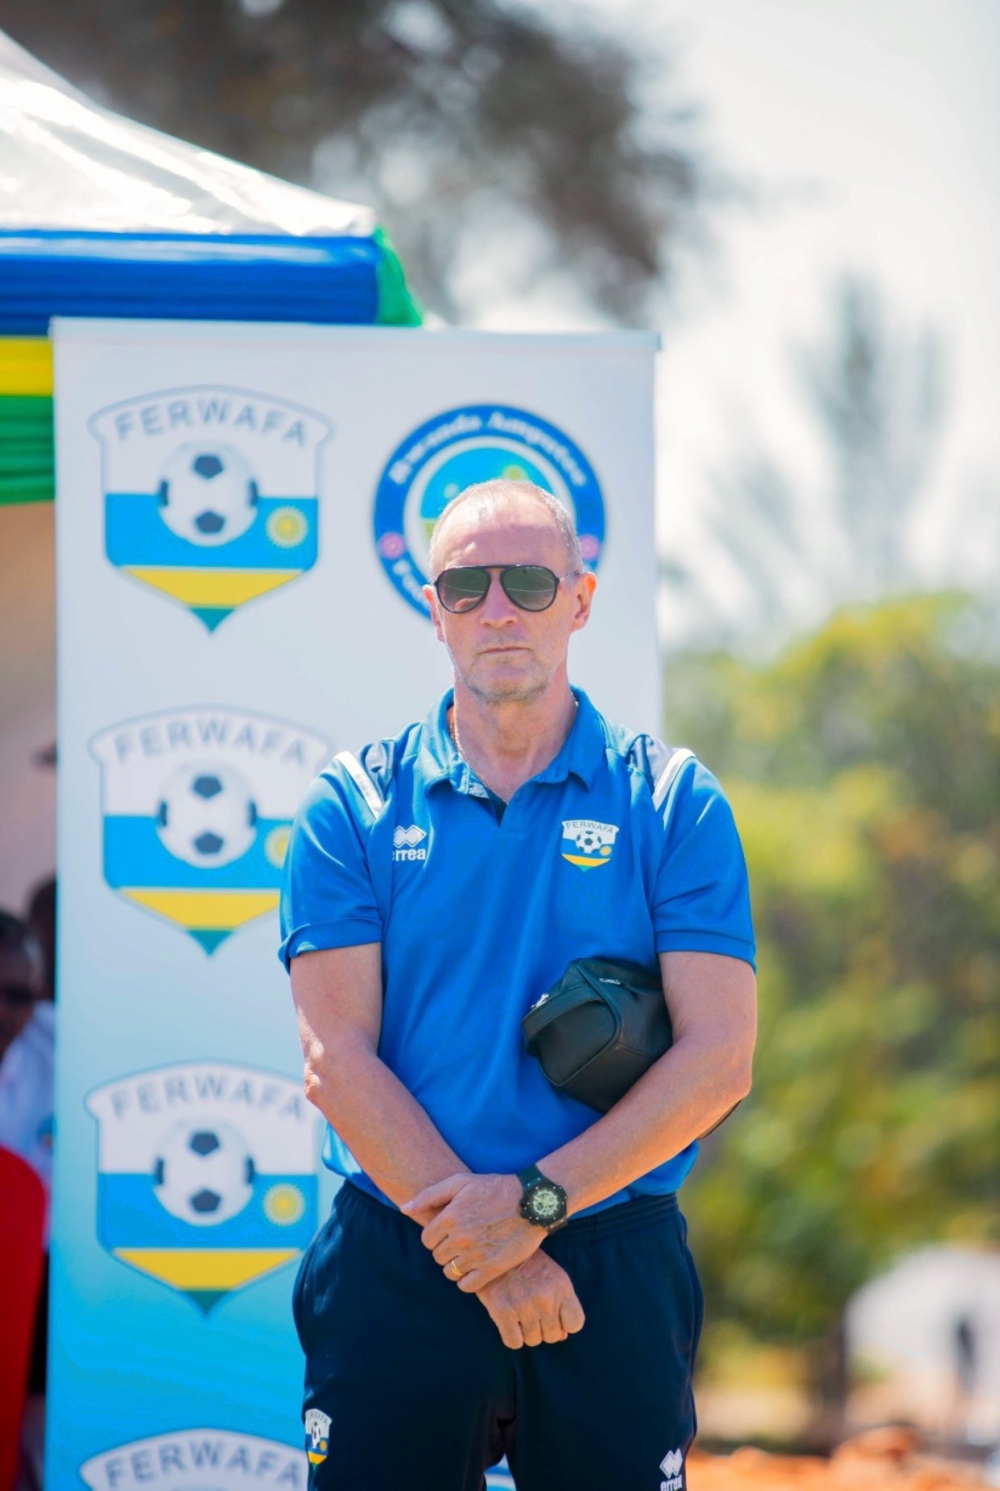 Gerard Buschier is appointed by the EXCOM as the Head Coach (Caretaker) of the National Team